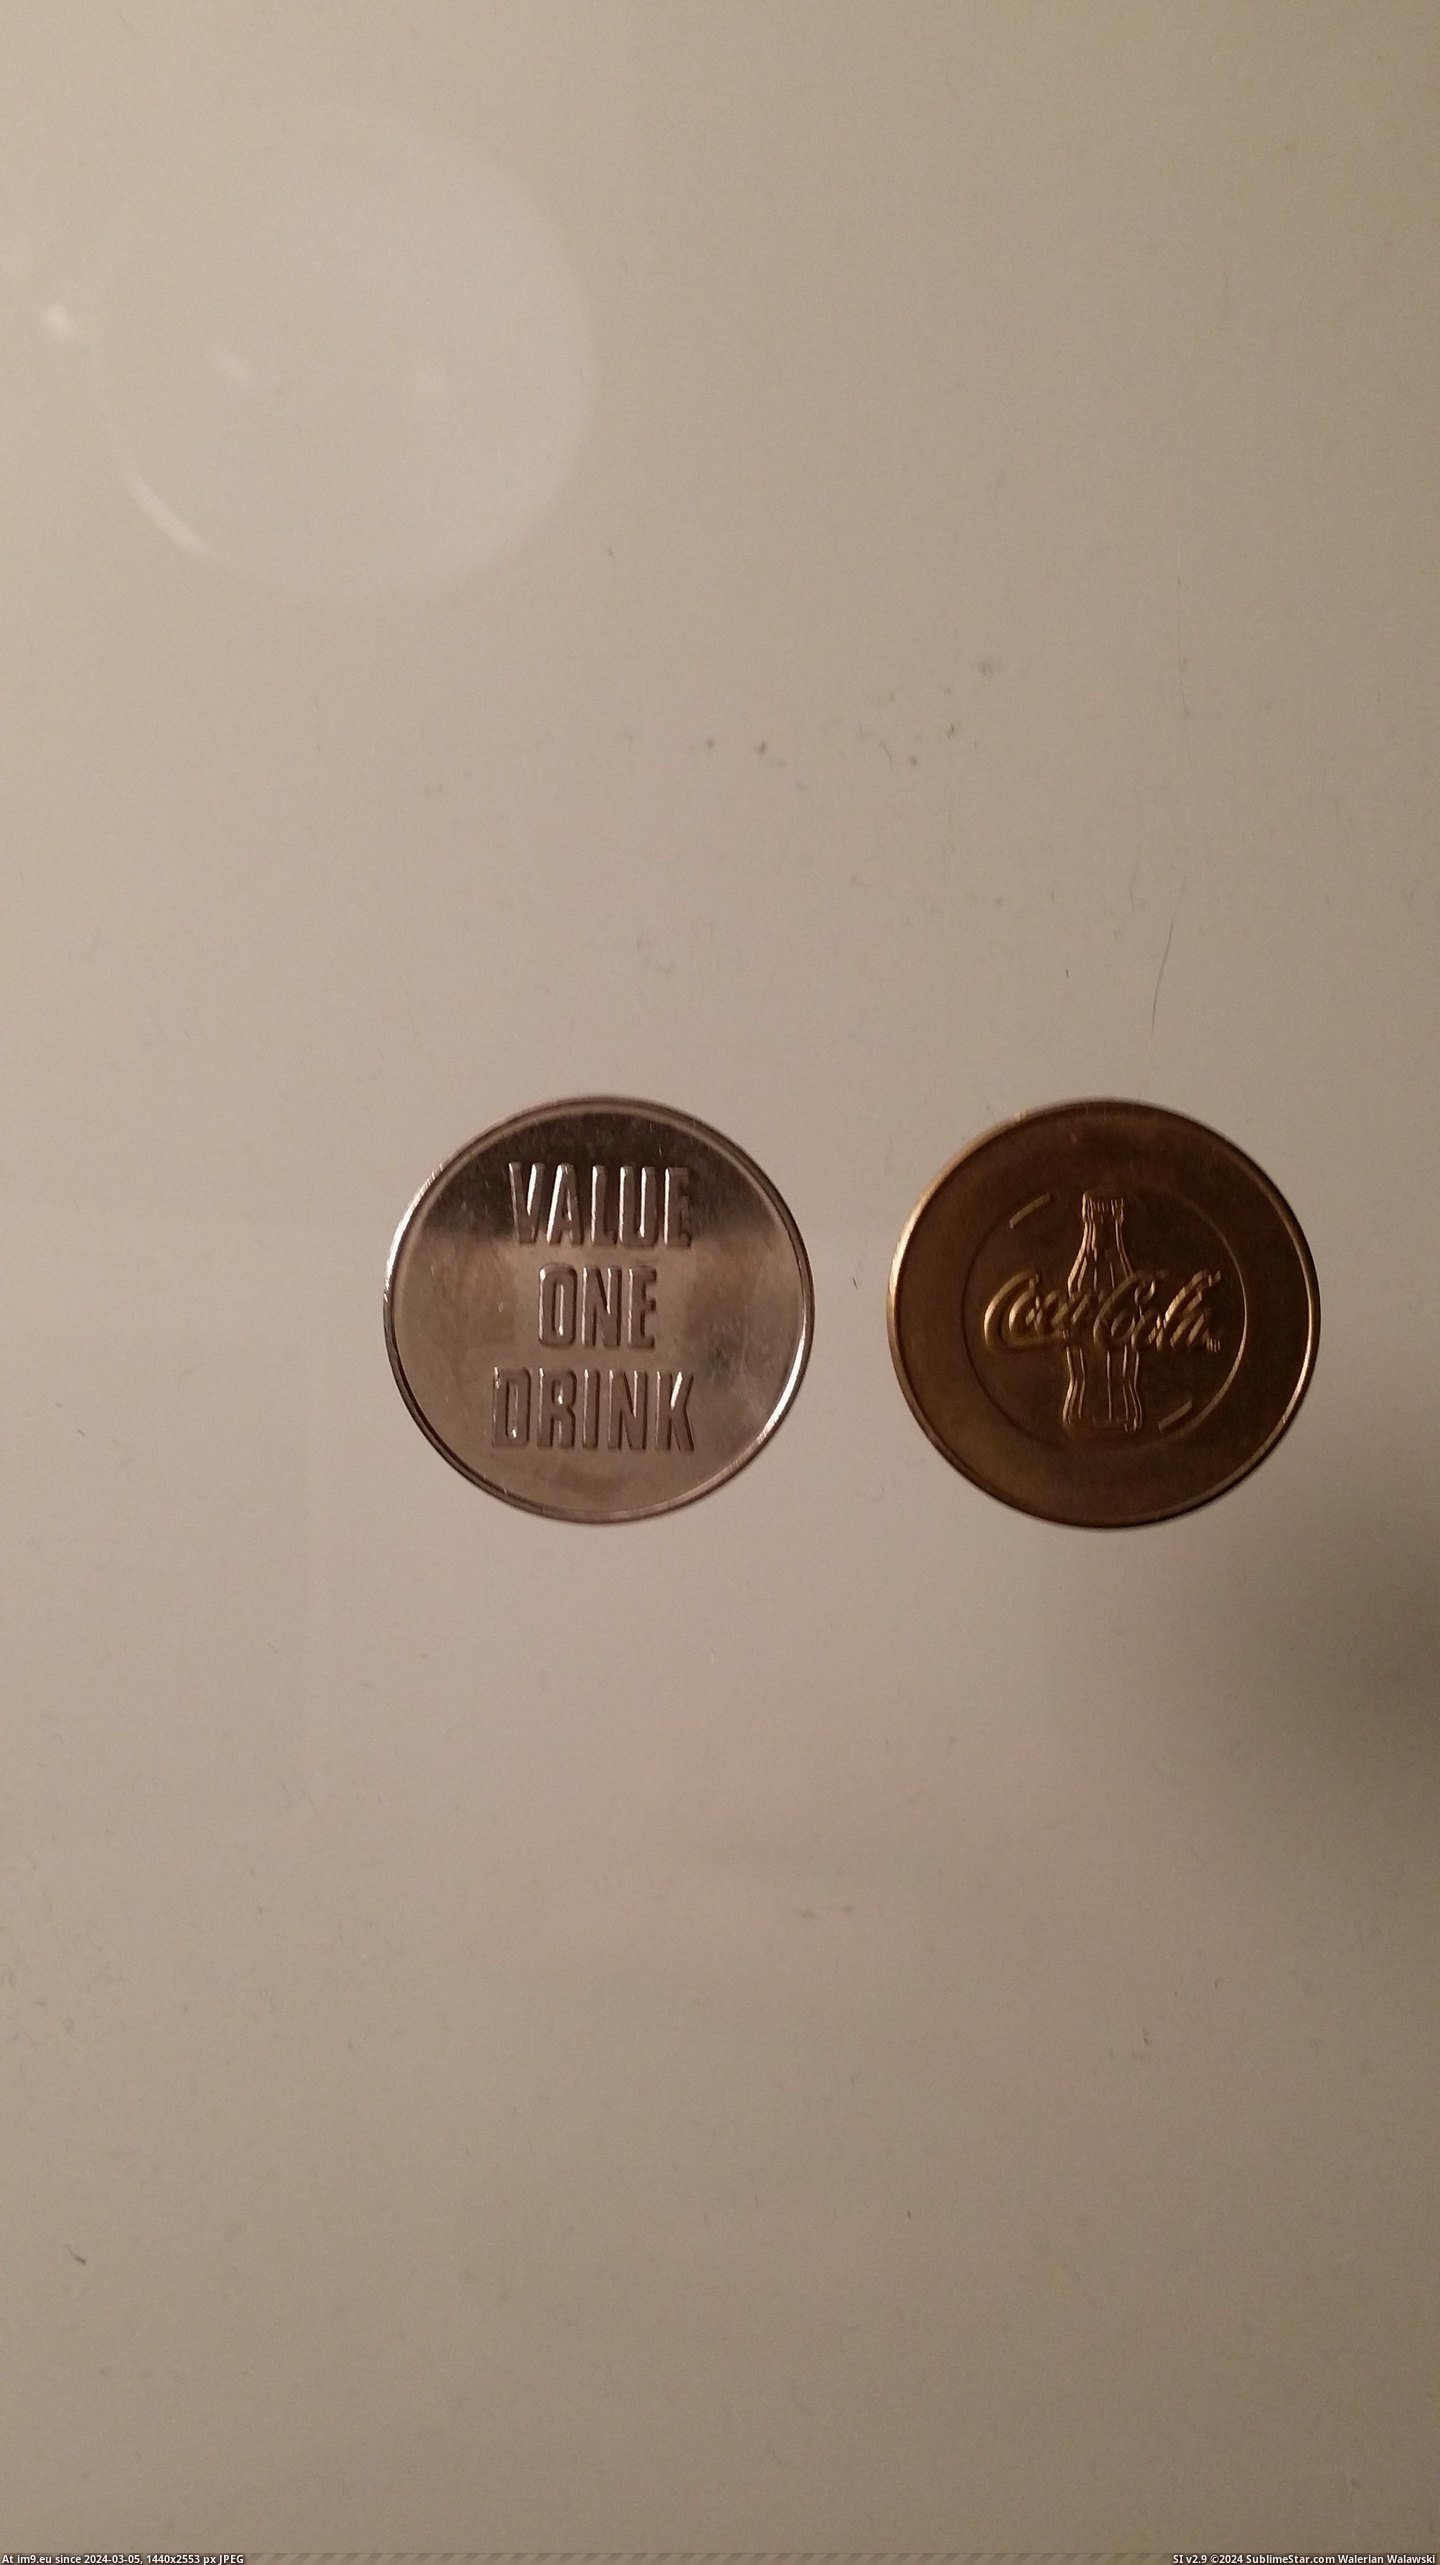 #Got #Get #Machine #Coins #Fault #Return #Reported #Coke [Mildlyinteresting] I didn't get my Coke from a machine once, reported the fault and got these coins in return 1 Pic. (Image of album My r/MILDLYINTERESTING favs))